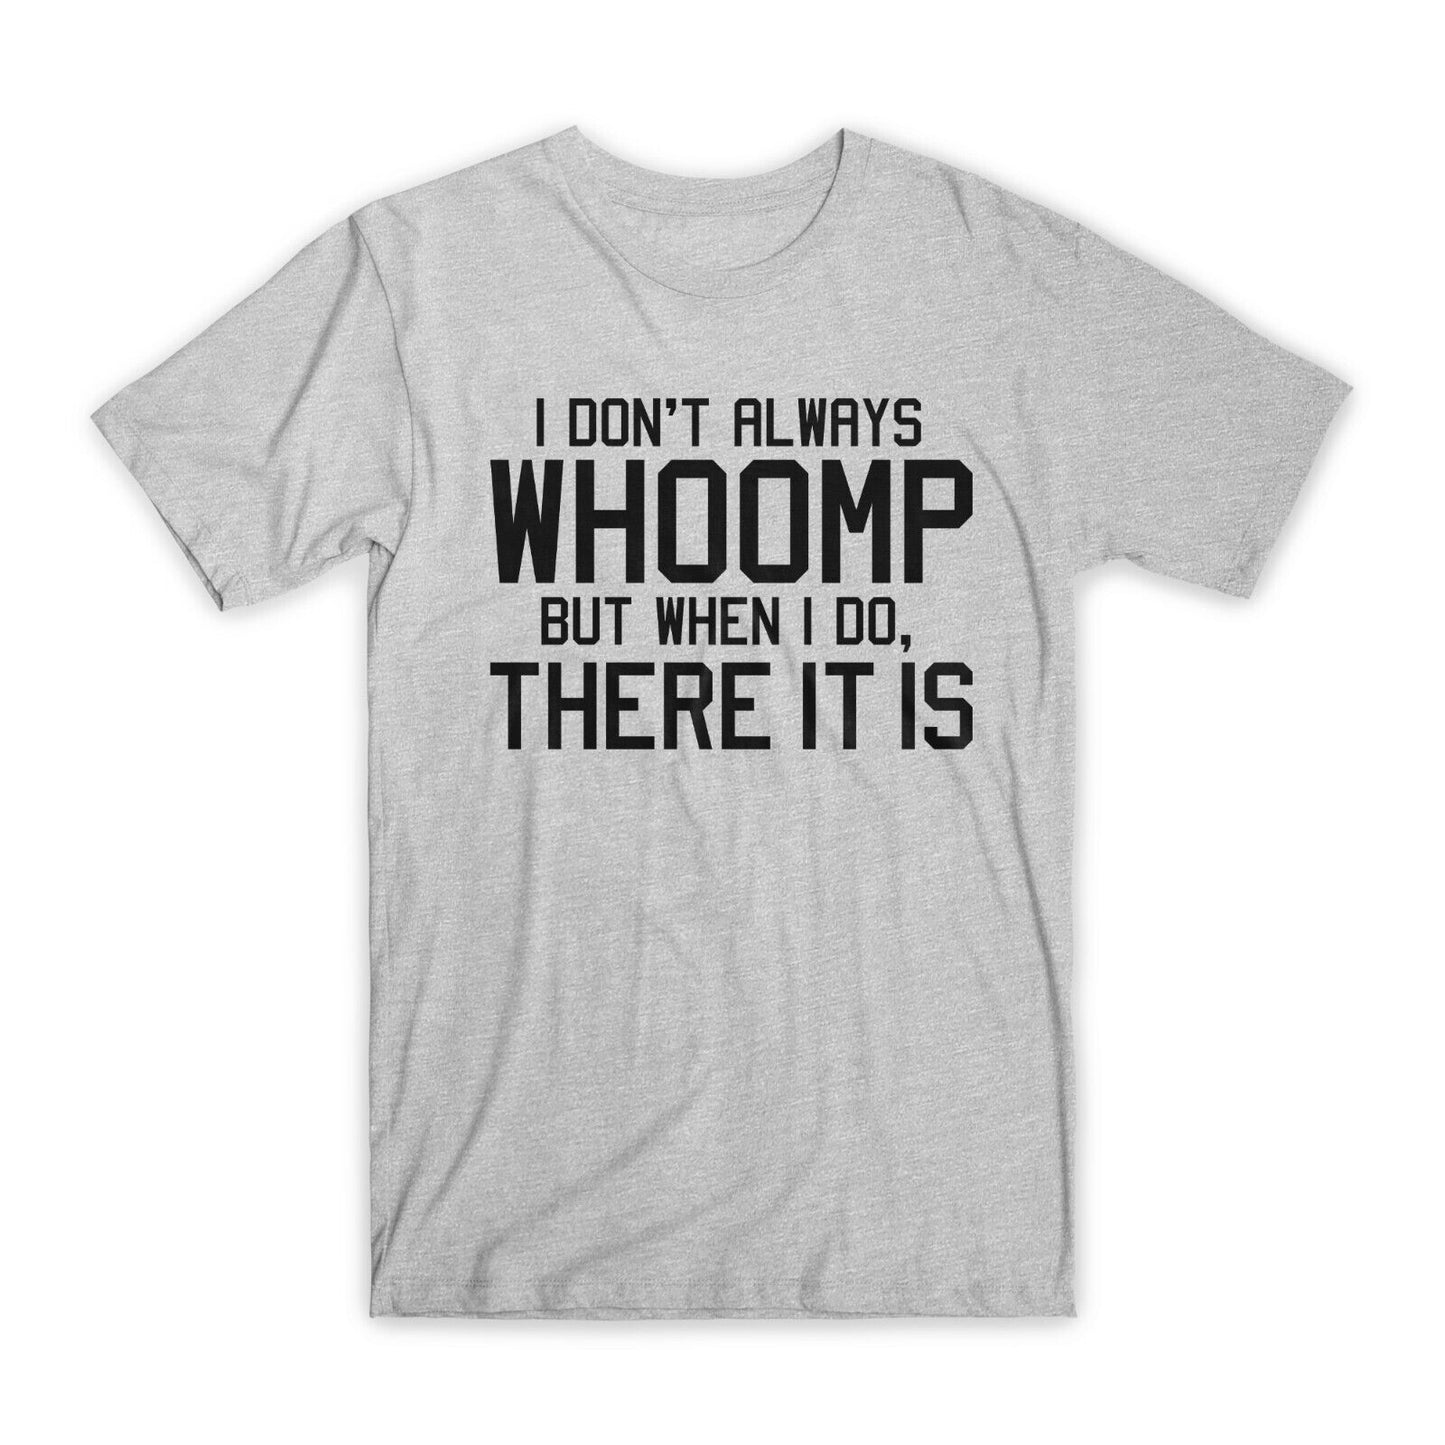 I Don't Always Whoomp T-Shirt Premium Soft Cotton Crew Neck Funny Tees Gifts NEW